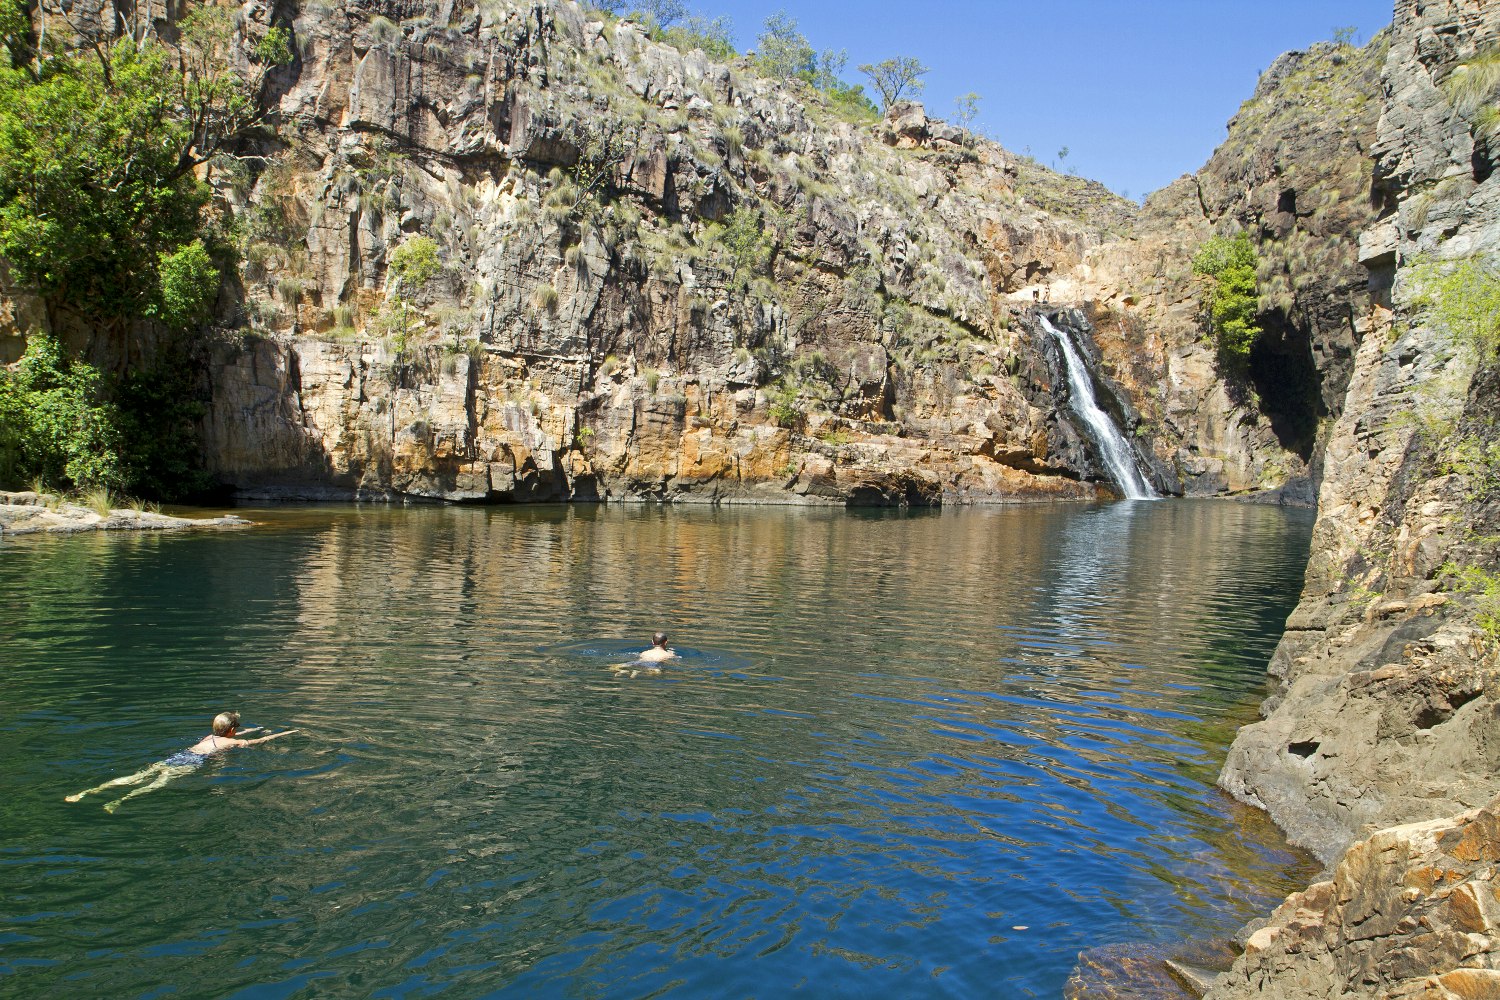 Swimming at the lower pool at Maguk (Barramundi Gorge). Image by Andrew Bain / Lonely Planet